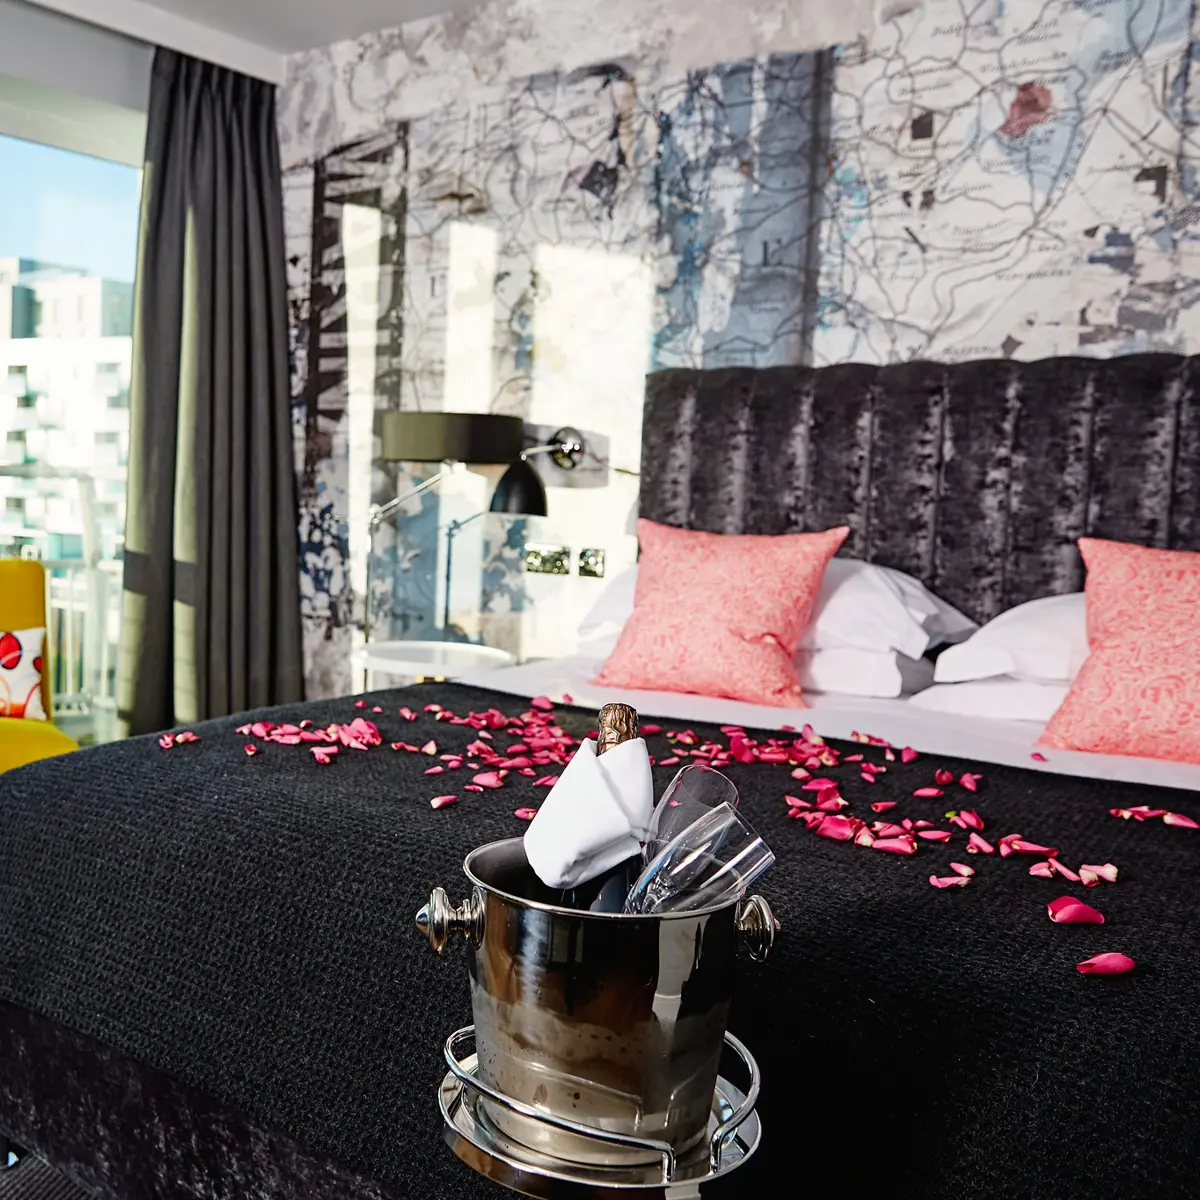 Bedroom in Malmaison Brighton covered in rose petals